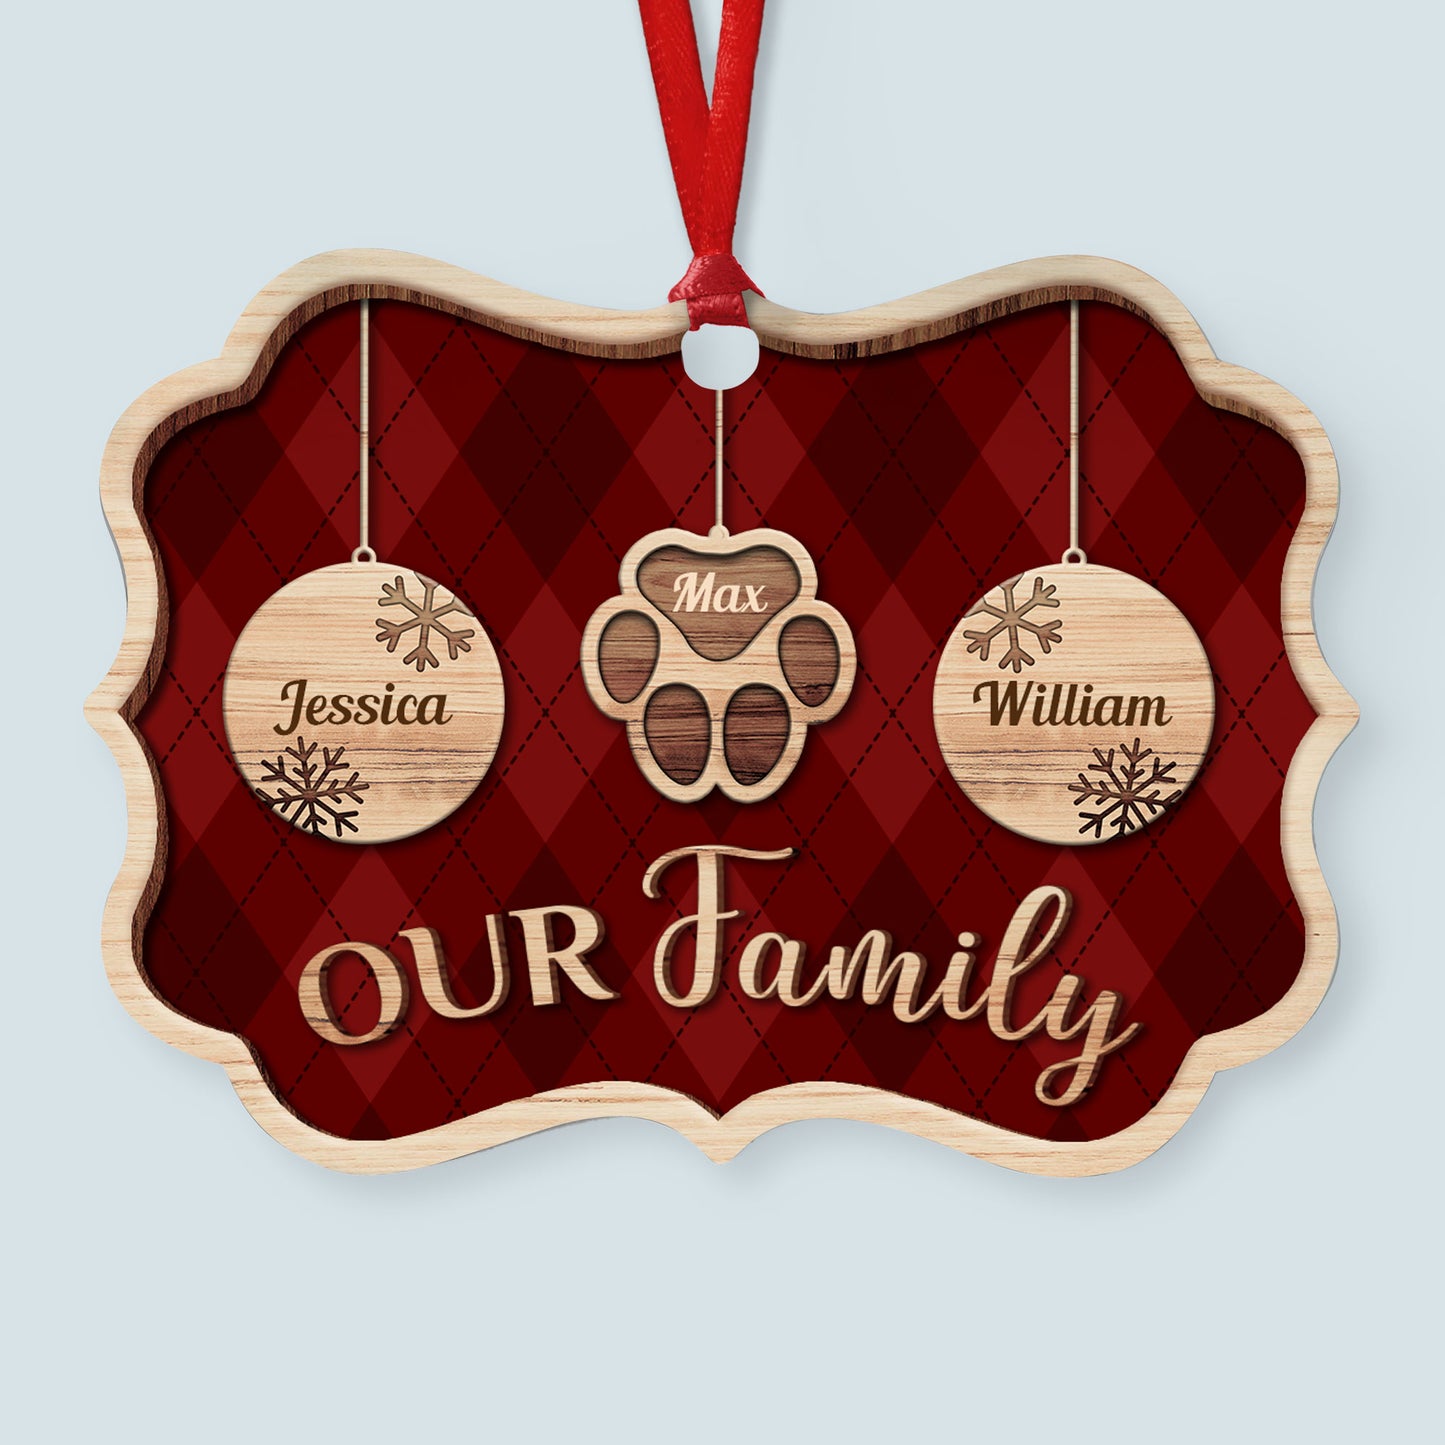 Our Family - Personalized Aluminum/Wooden Ornament